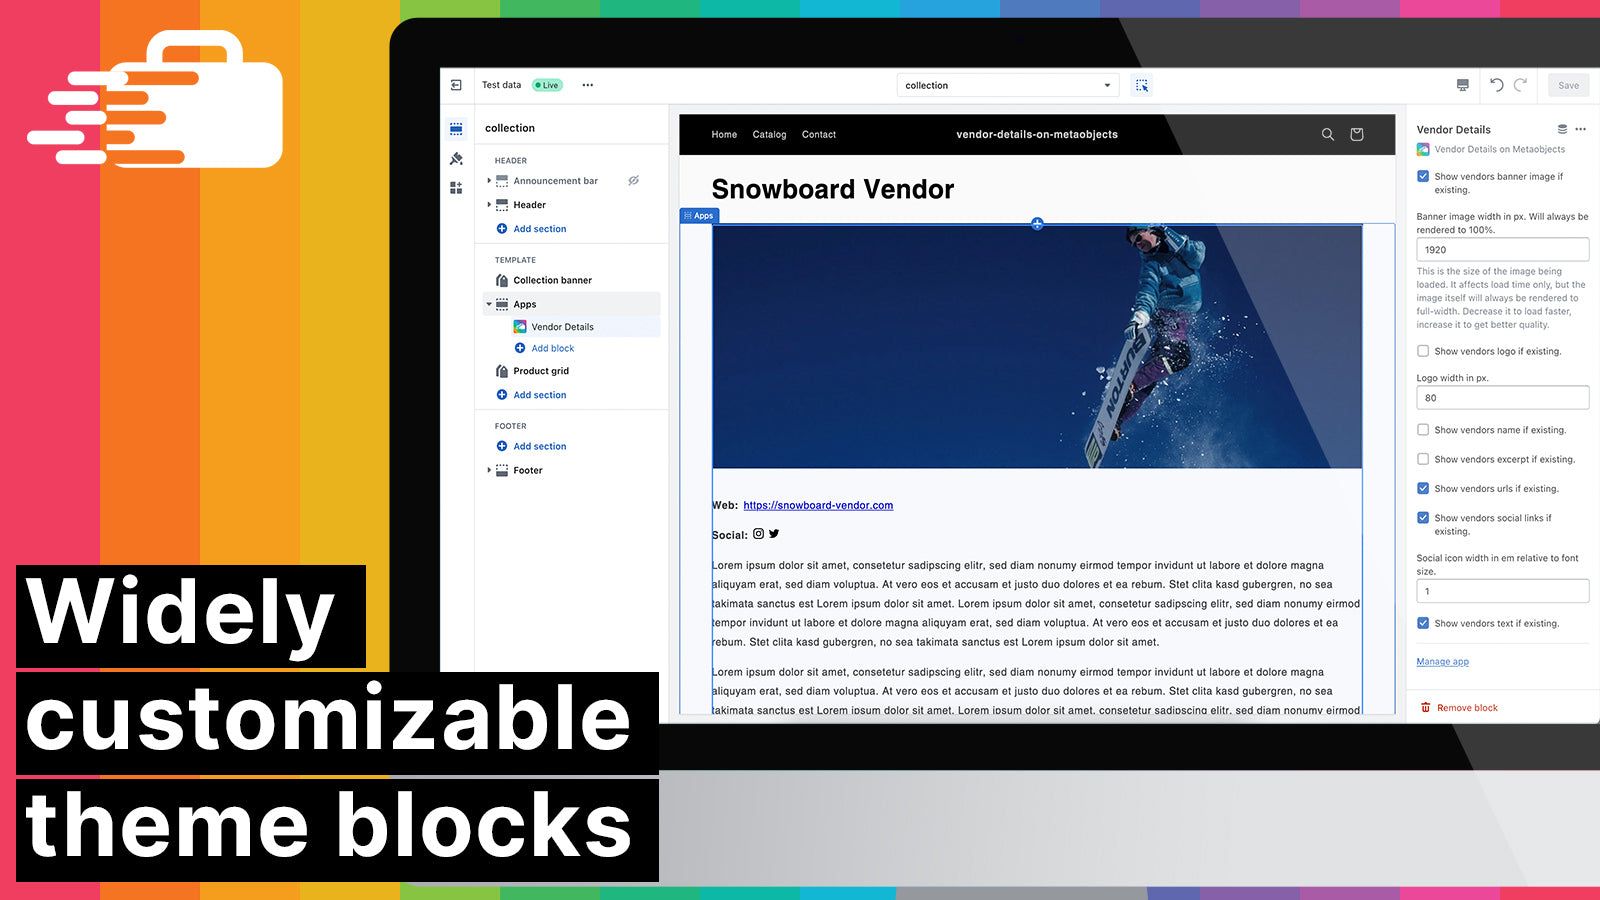 Widely customizable theme blocks. Use your own styling.